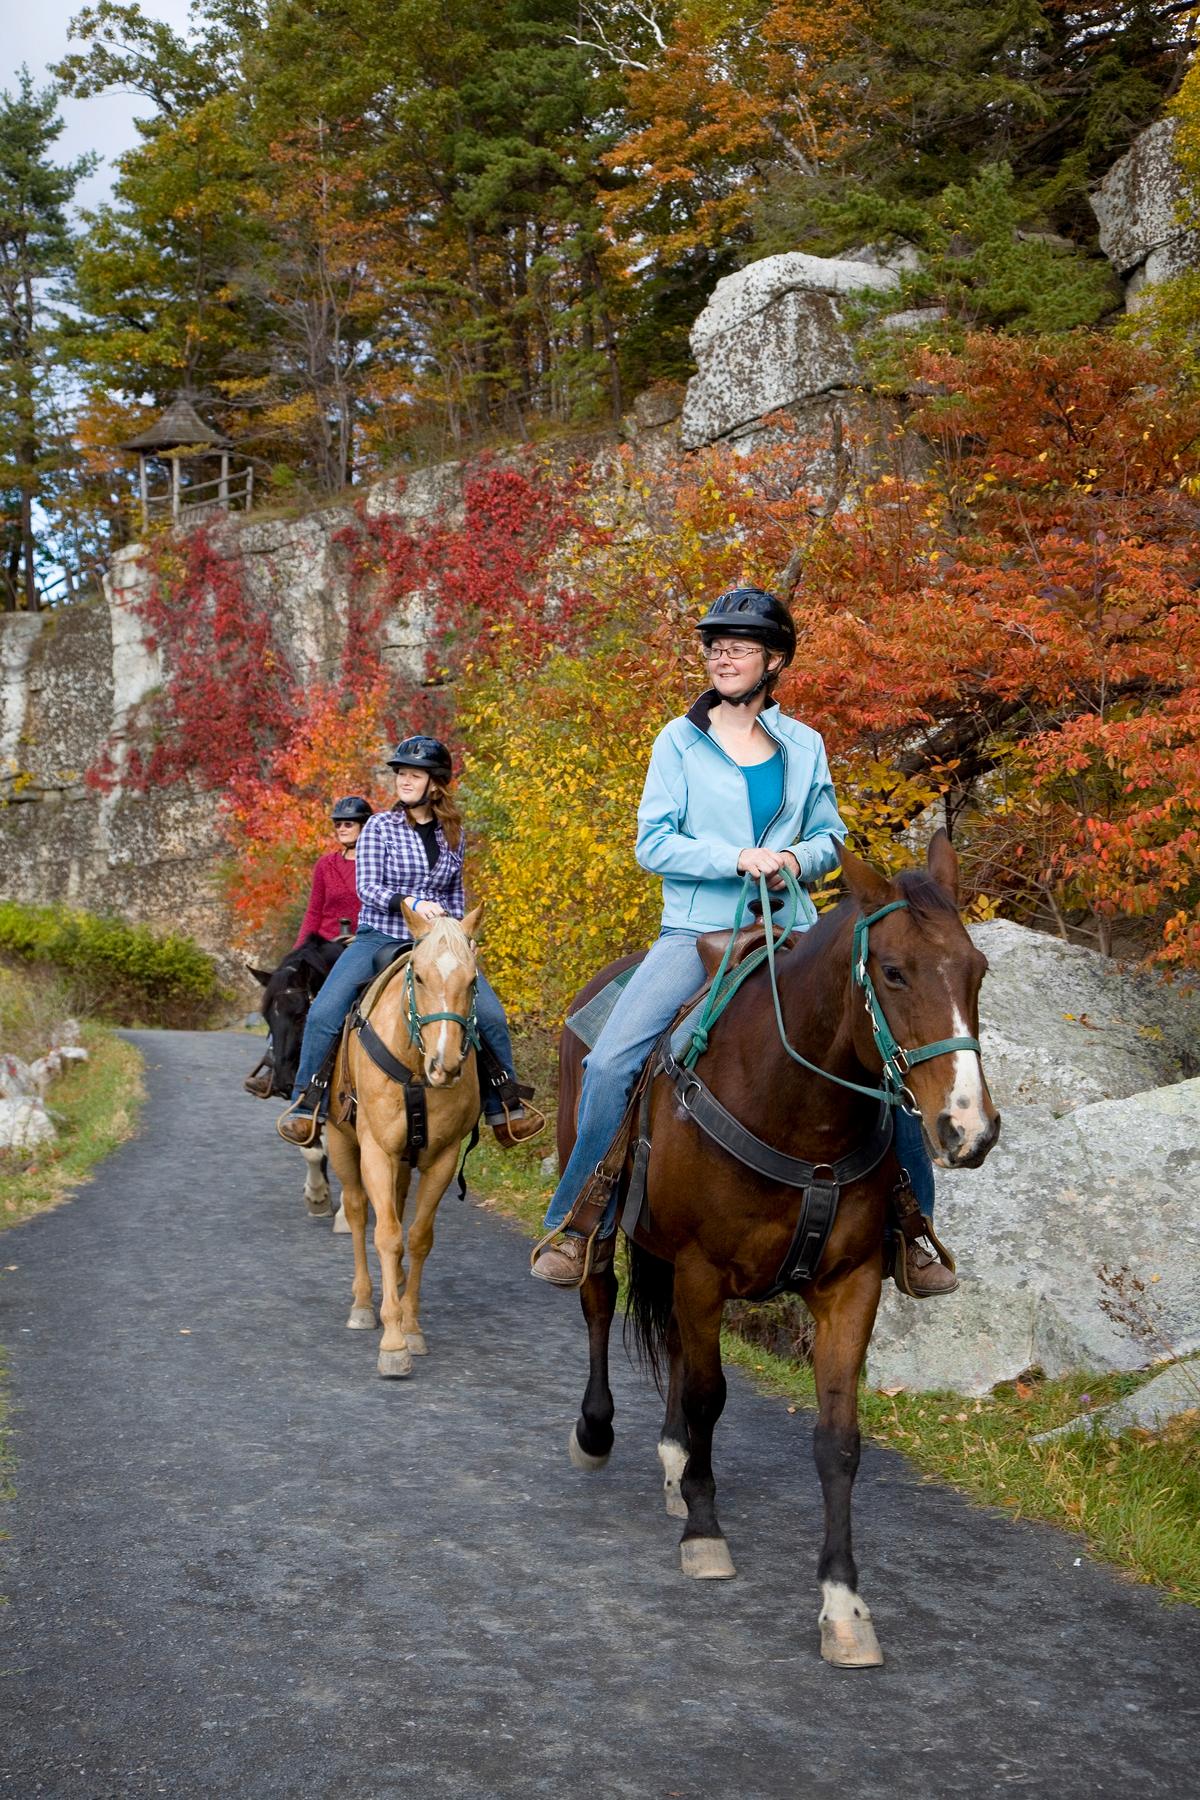 Horseback riding is one of the many activities on offer. (Courtesy of Mohonk Mountain House)